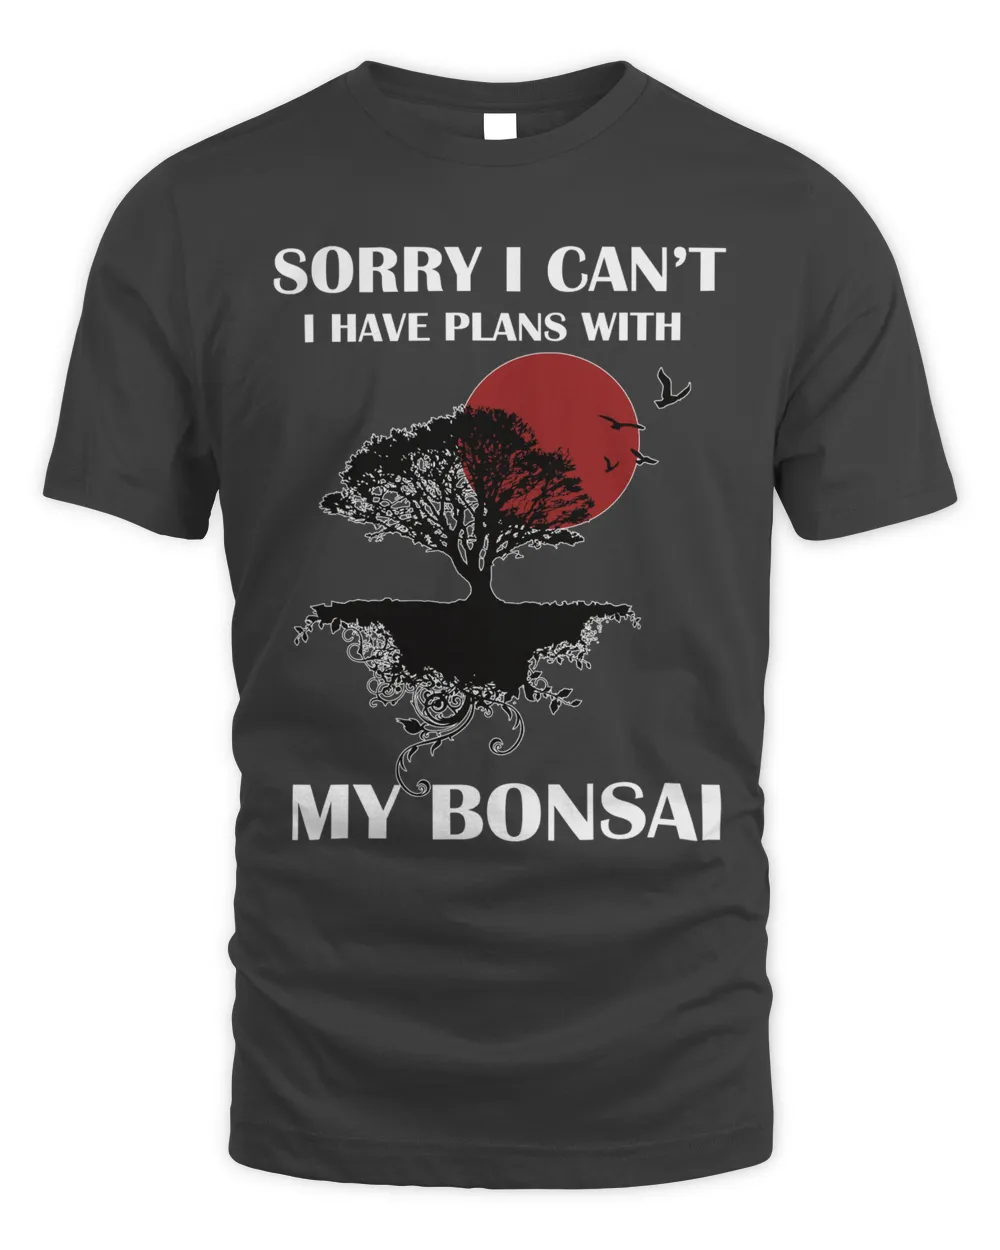 Sorry I have plans with bonsai